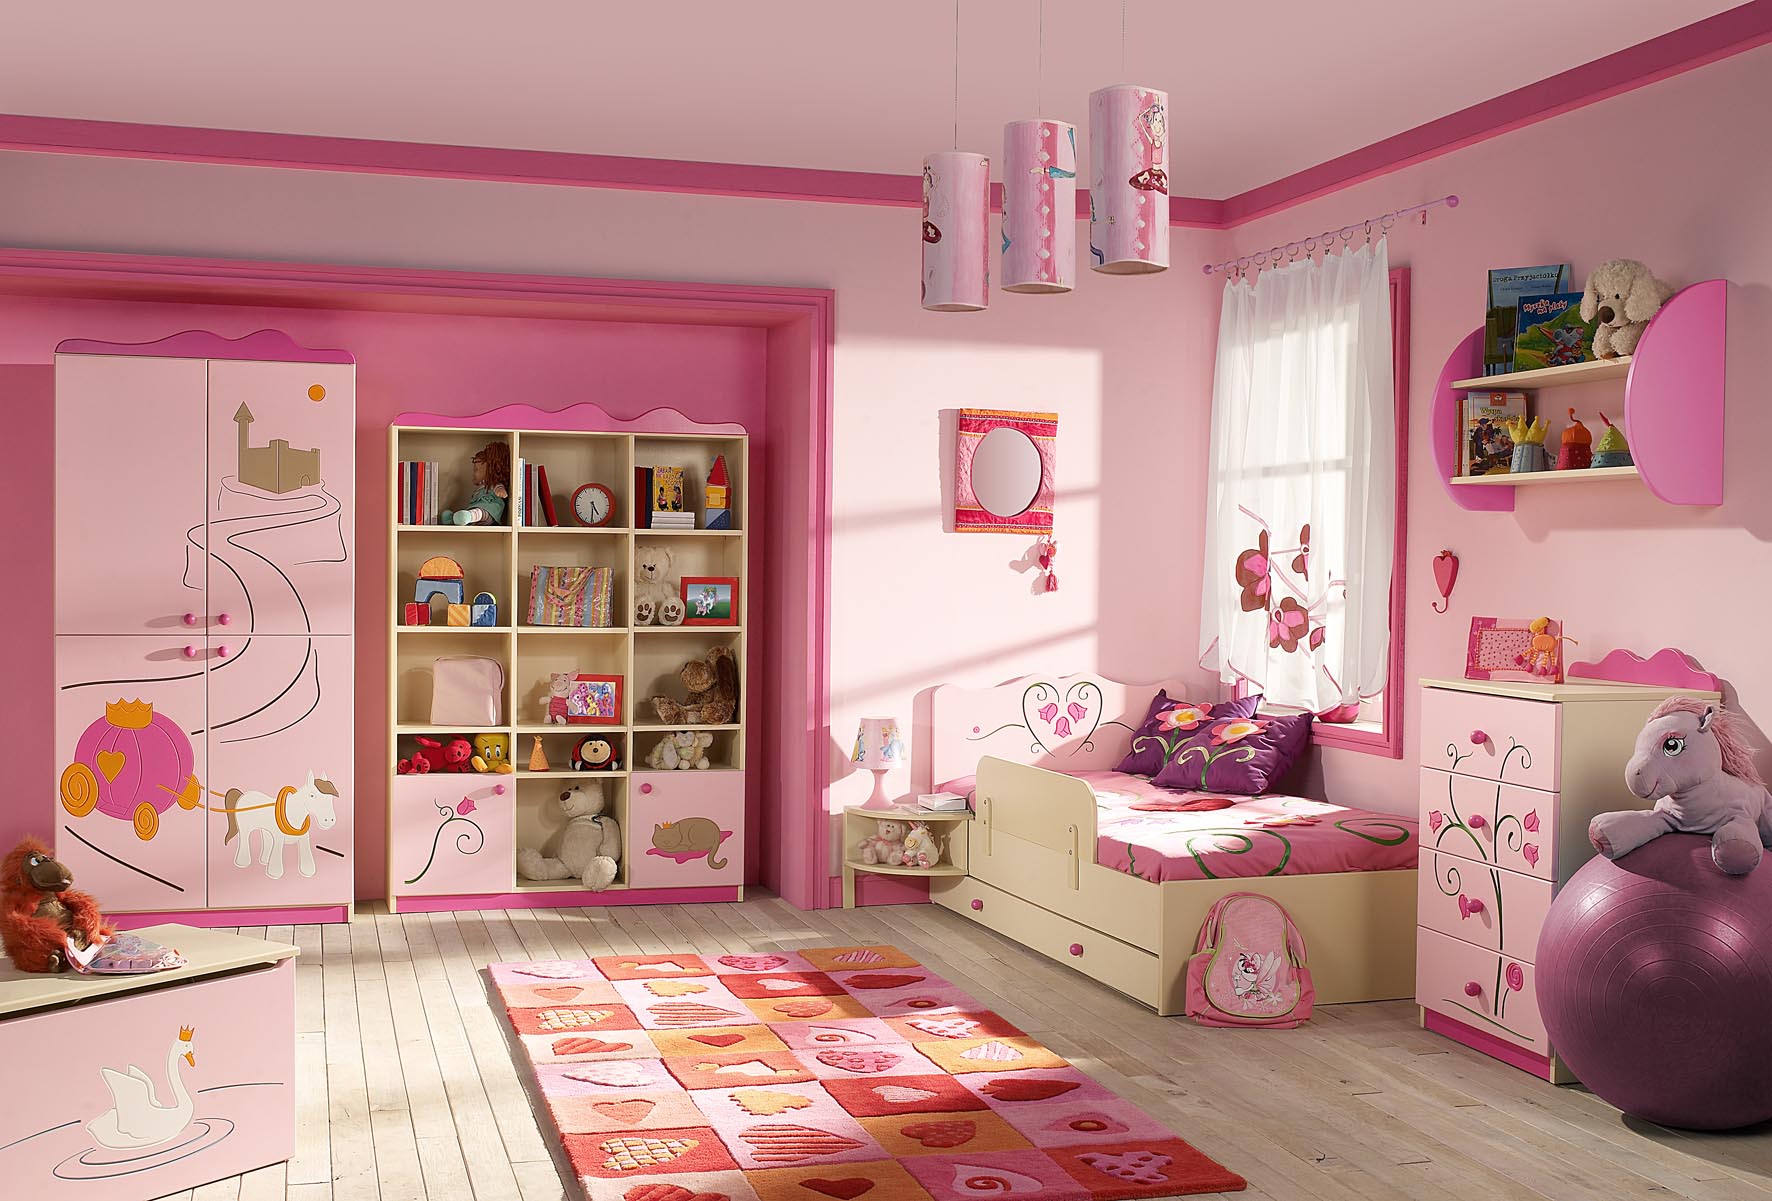 Kids Bedroom For Girl With Laminated FLoorCupboardStorageDoolPictureWatchToysCarpetLampMirrorPendant LampBagFlower Curtain And Window For Modern Colorful Concept Kids Room